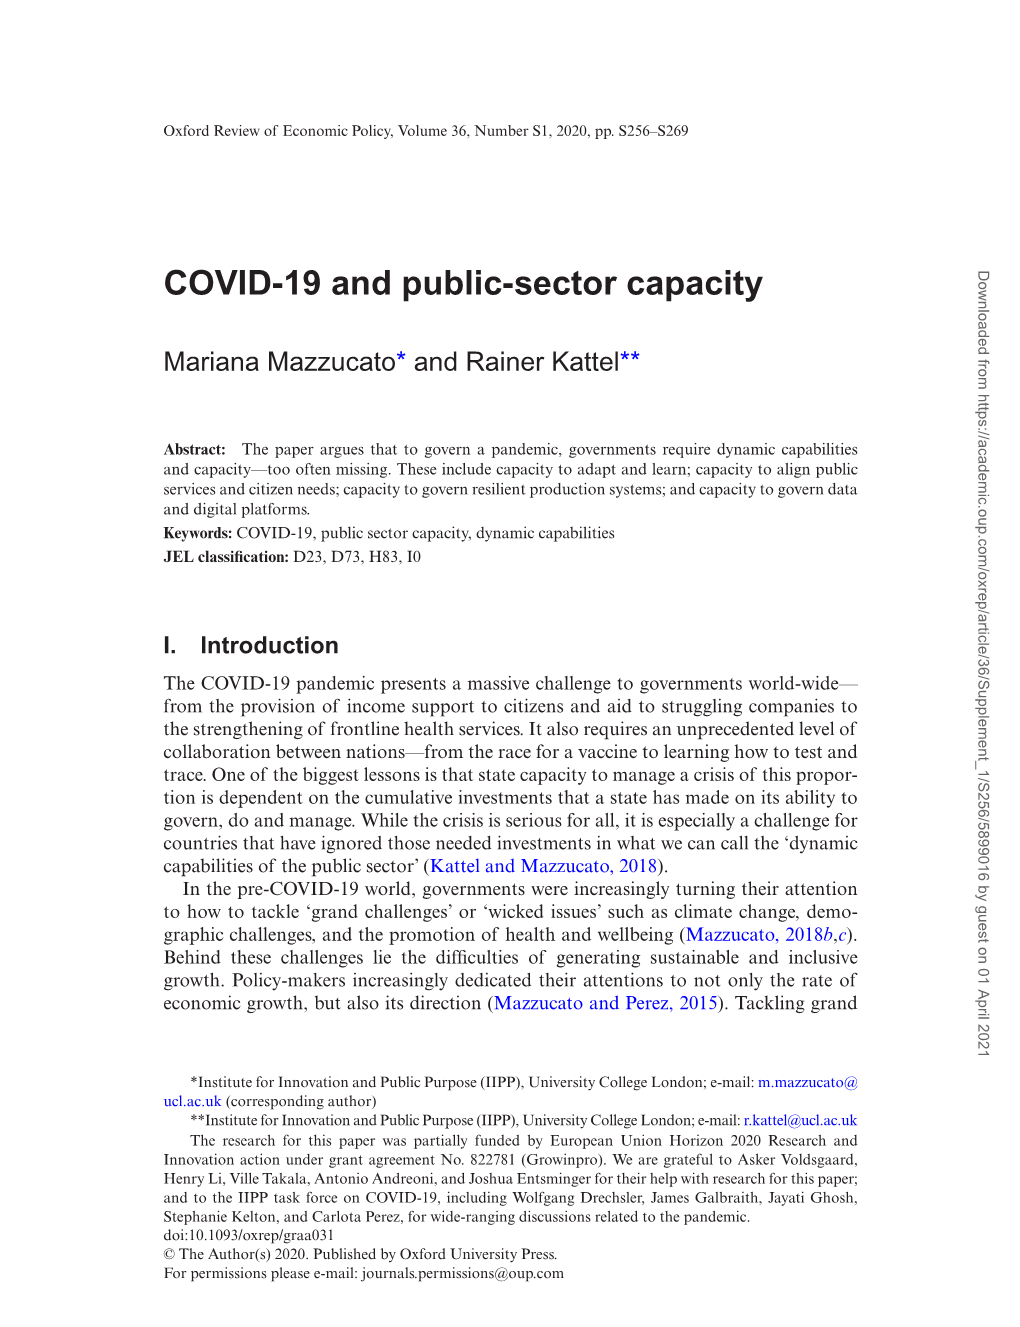 COVID-19 and Public-Sector Capacity Downloaded from by Guest on 01 April 2021